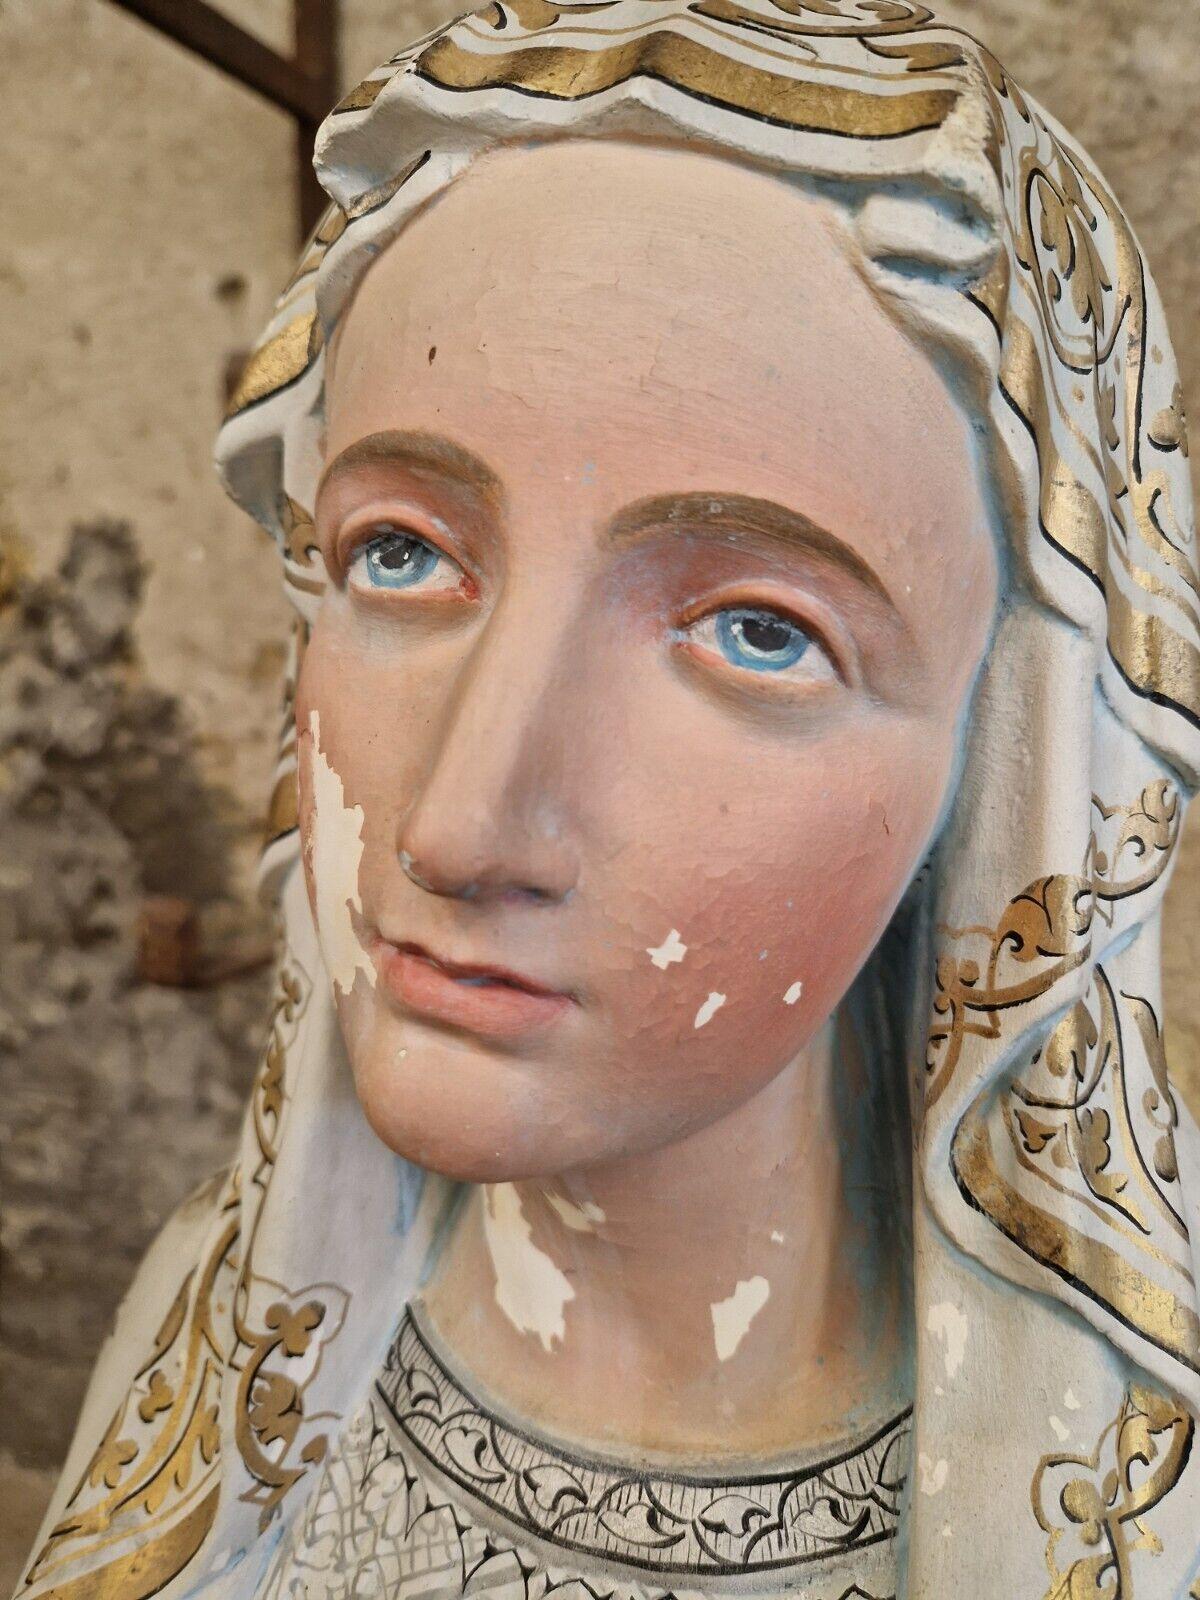 
This exquisite sculpture is a true masterpiece from the 19th century, featuring Mary of Lourdes in all her glory. Crafted with precision and care, it is a must-have for any art collector or enthusiast. The sculpture is a true representation of the